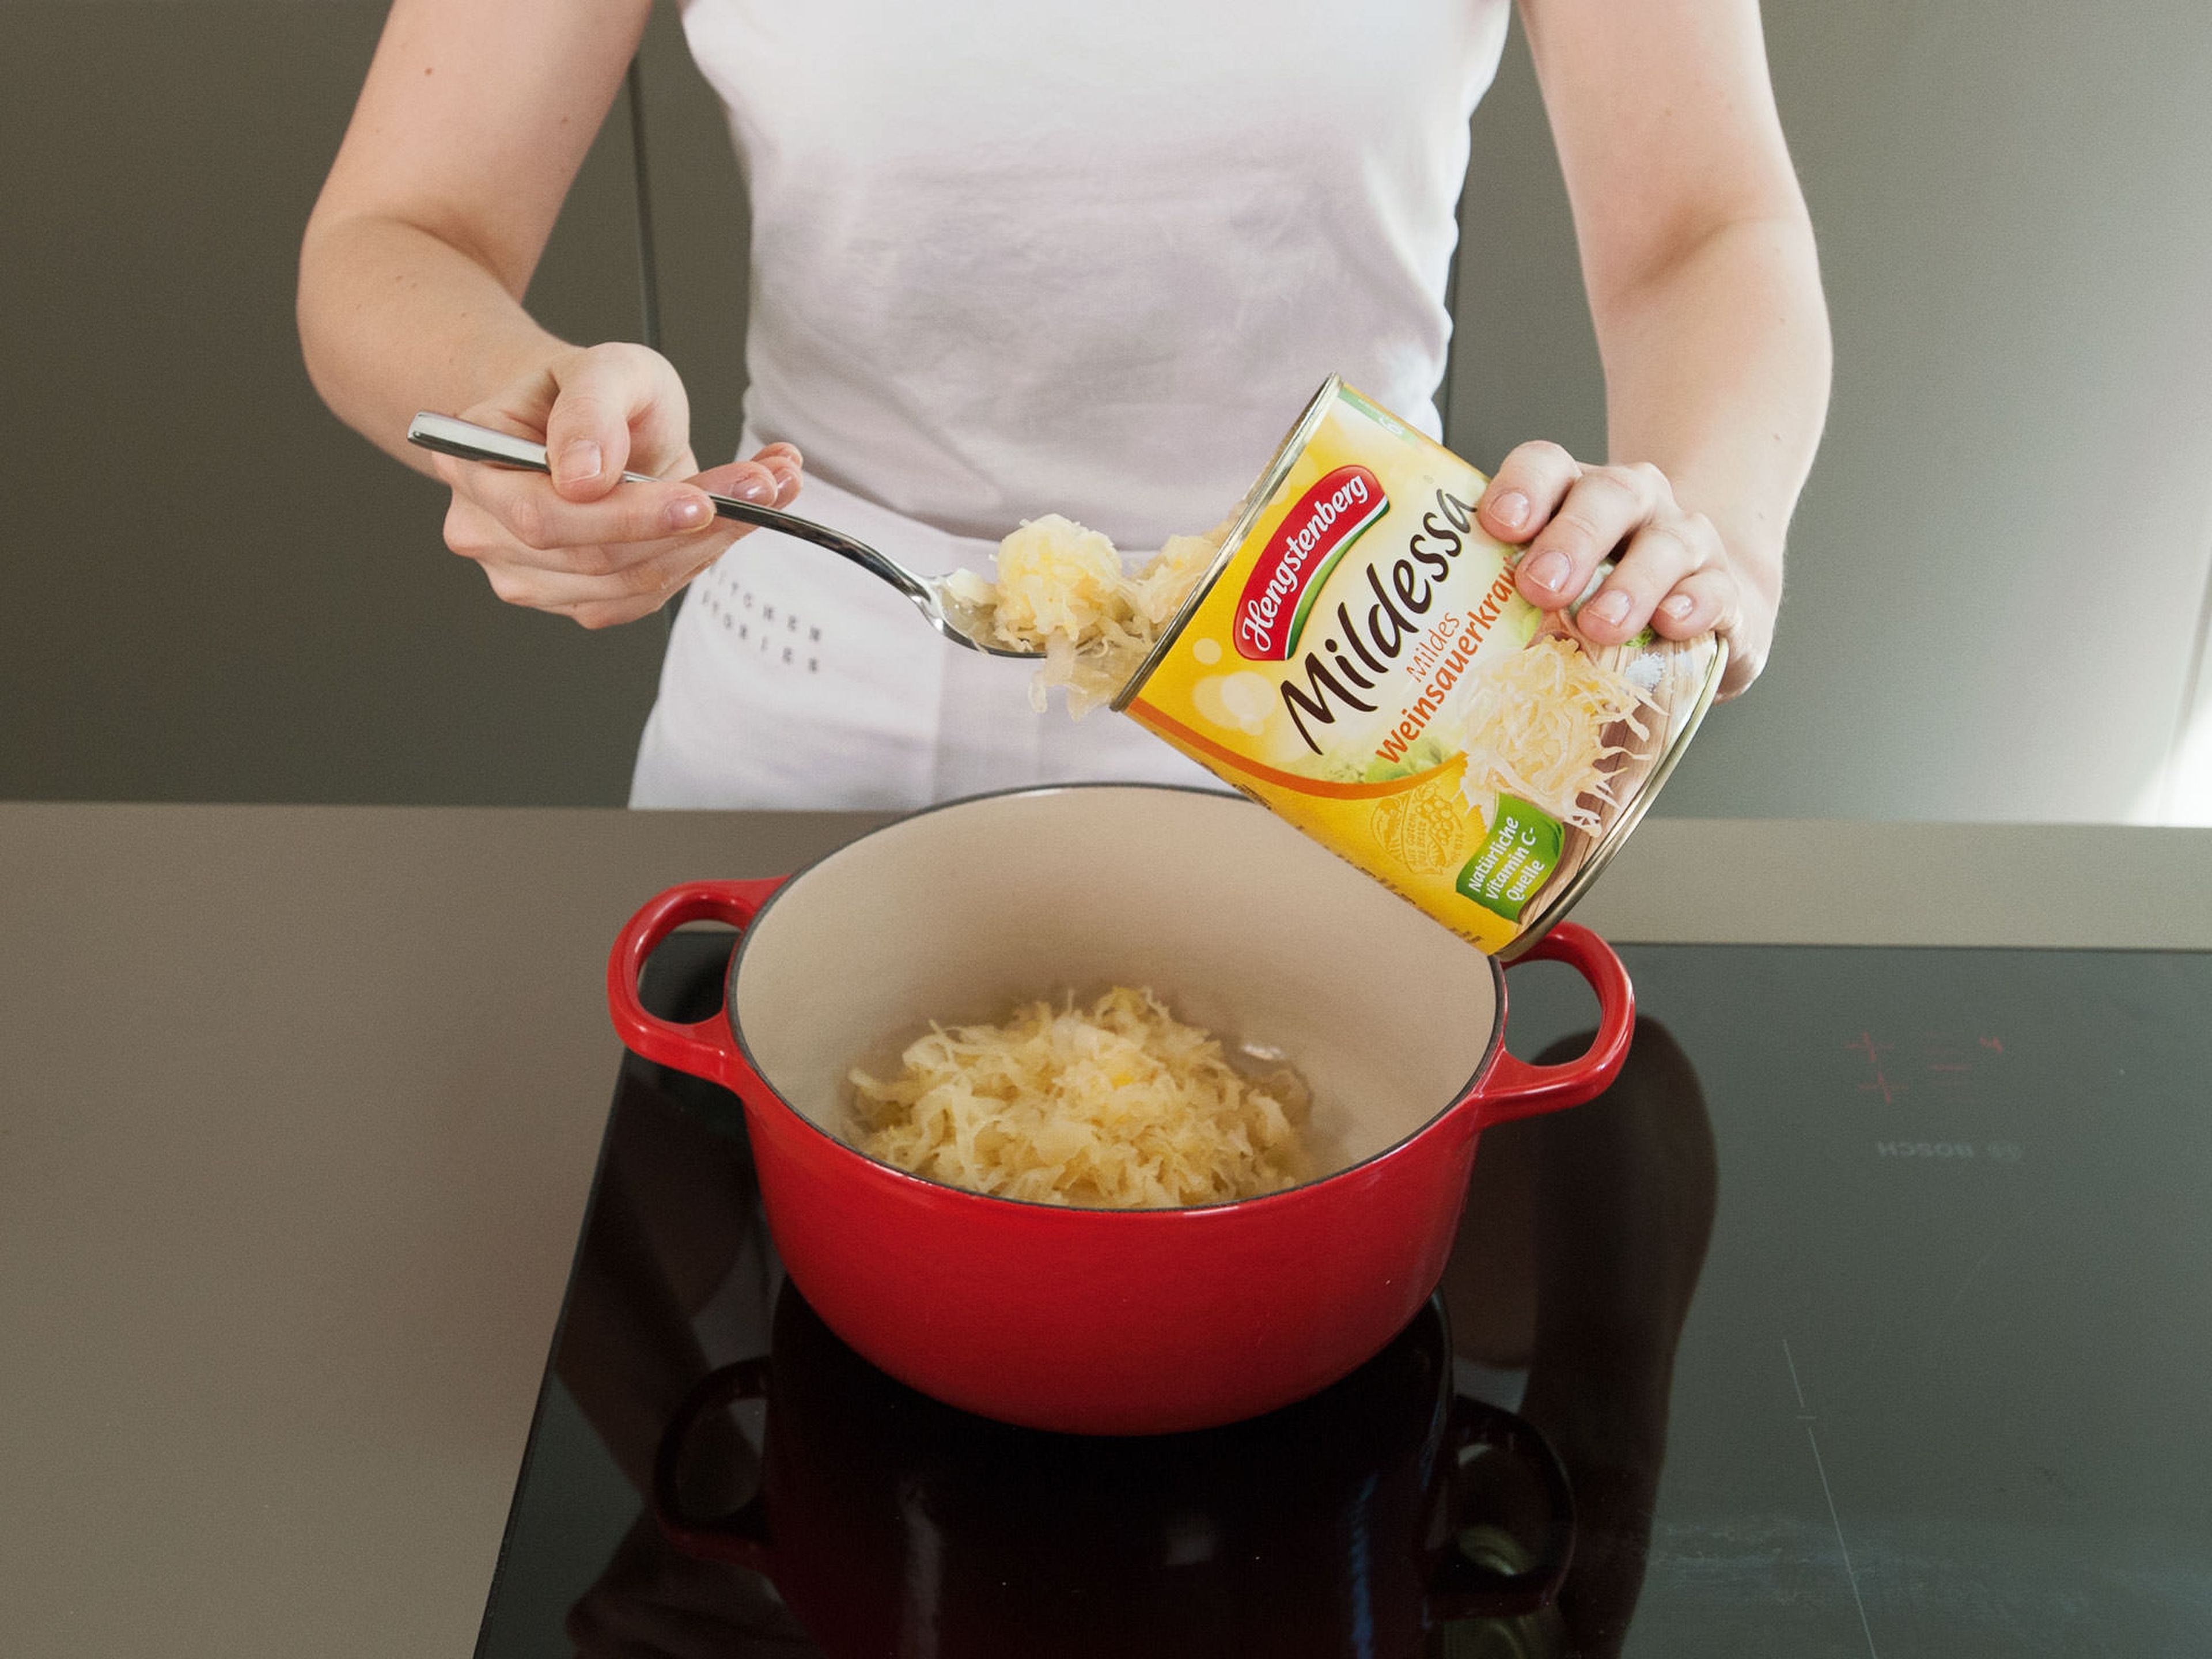 In a small saucepan, heat up drained sauerkraut over medium-low heat for approx. 5 – 7 min. Cover and remove from heat.